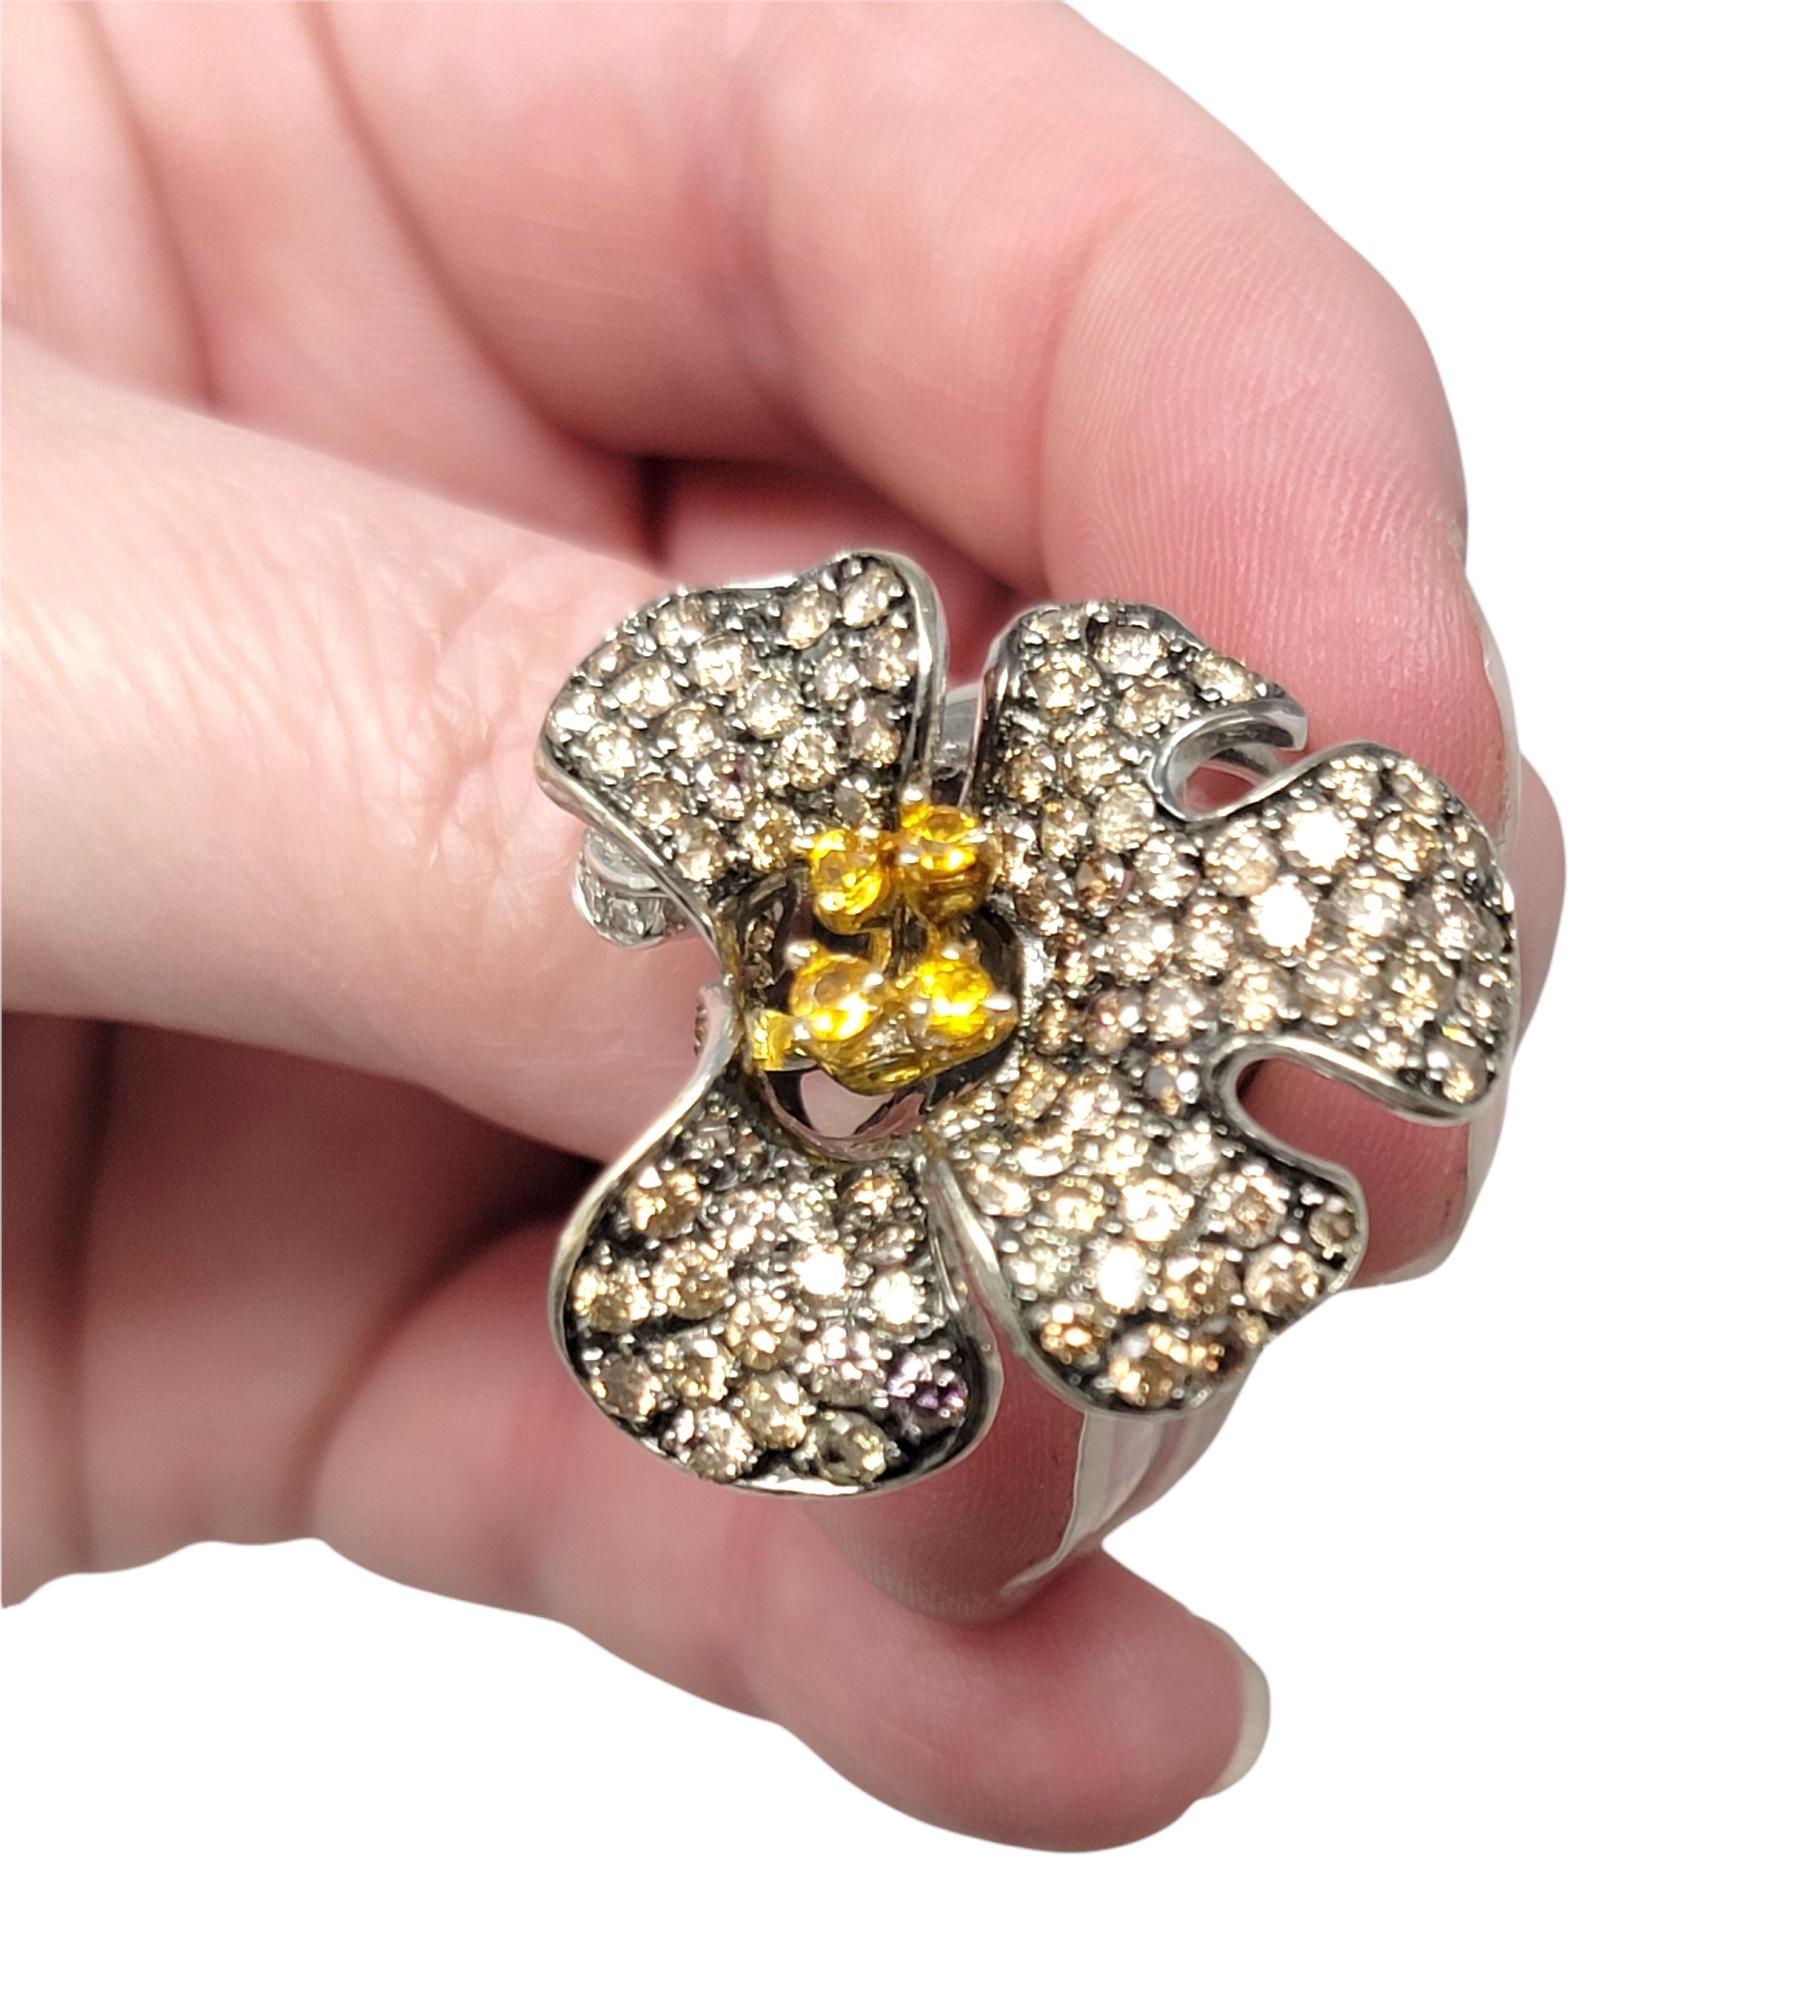 3D Pave Diamond Orchid Flower Ring with Orange Sapphire Accents in White Gold For Sale 6